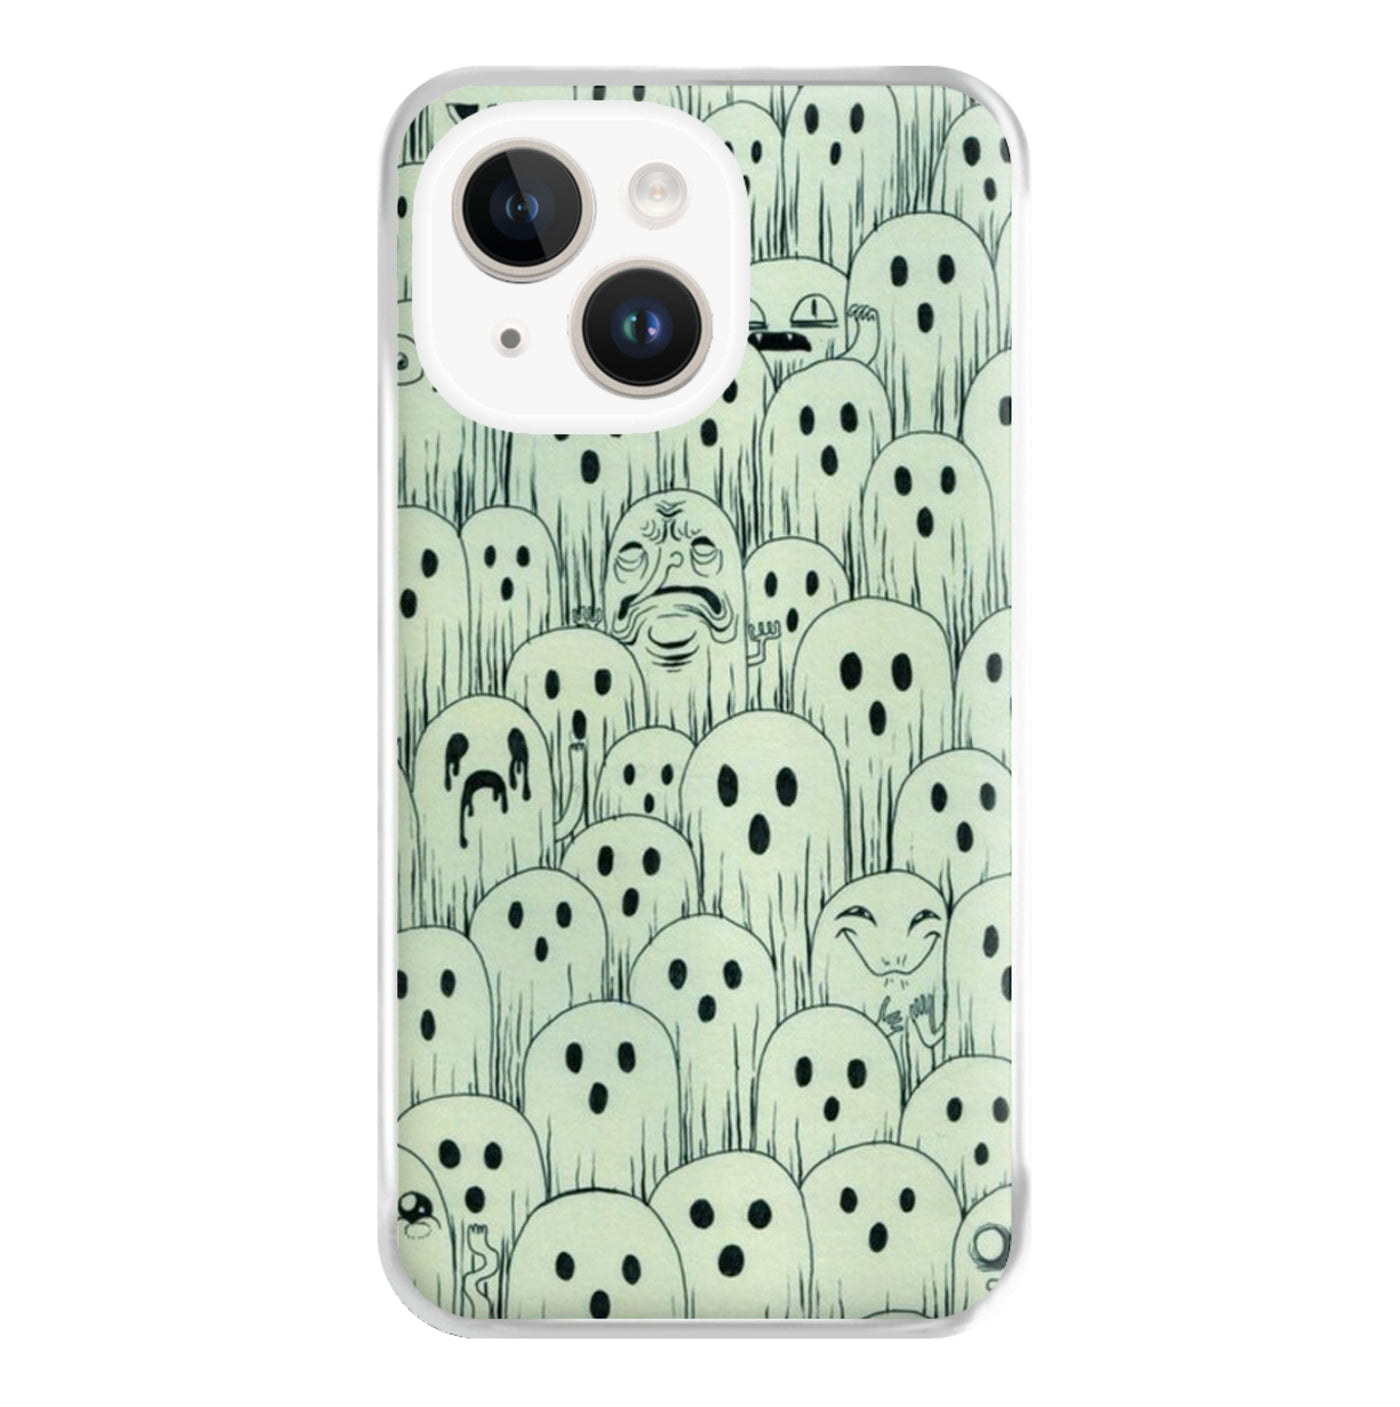 Droopy Ghost Pattern Phone Case